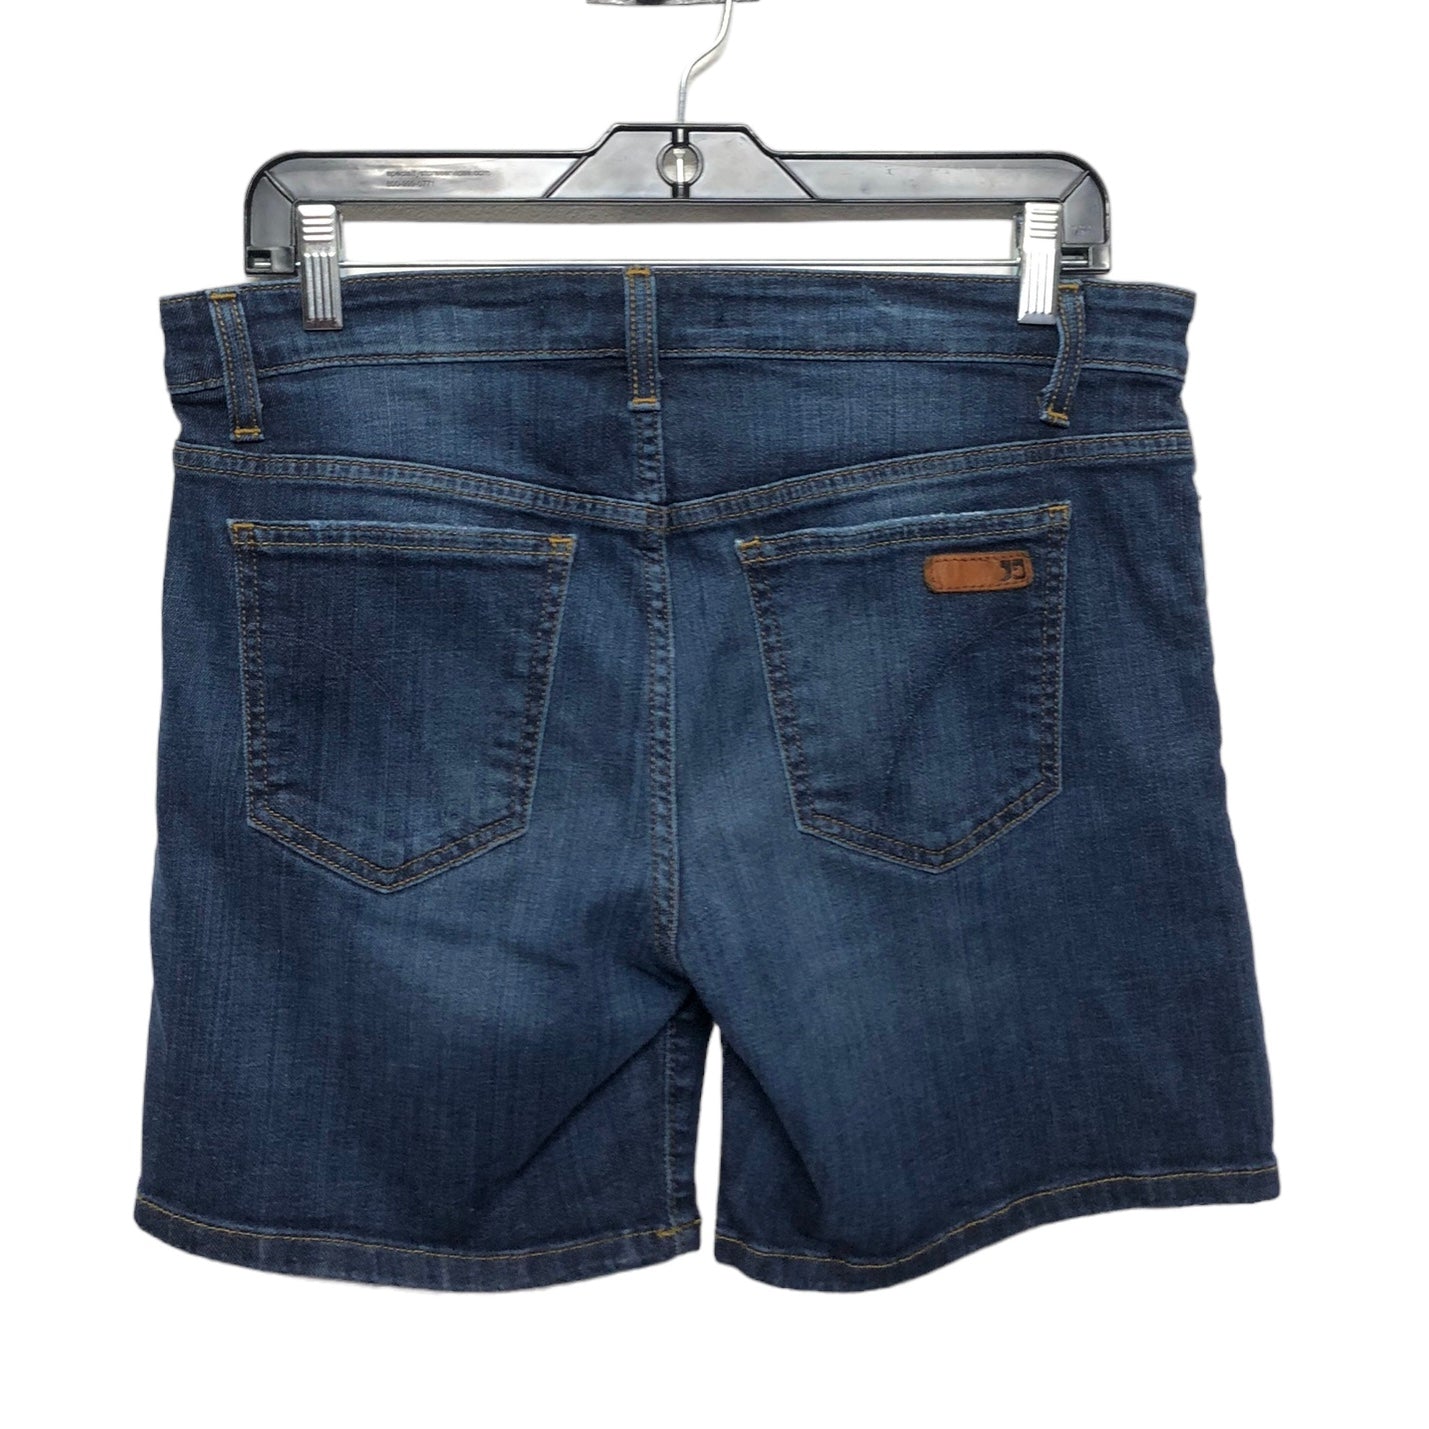 Shorts By Joes Jeans  Size: 6